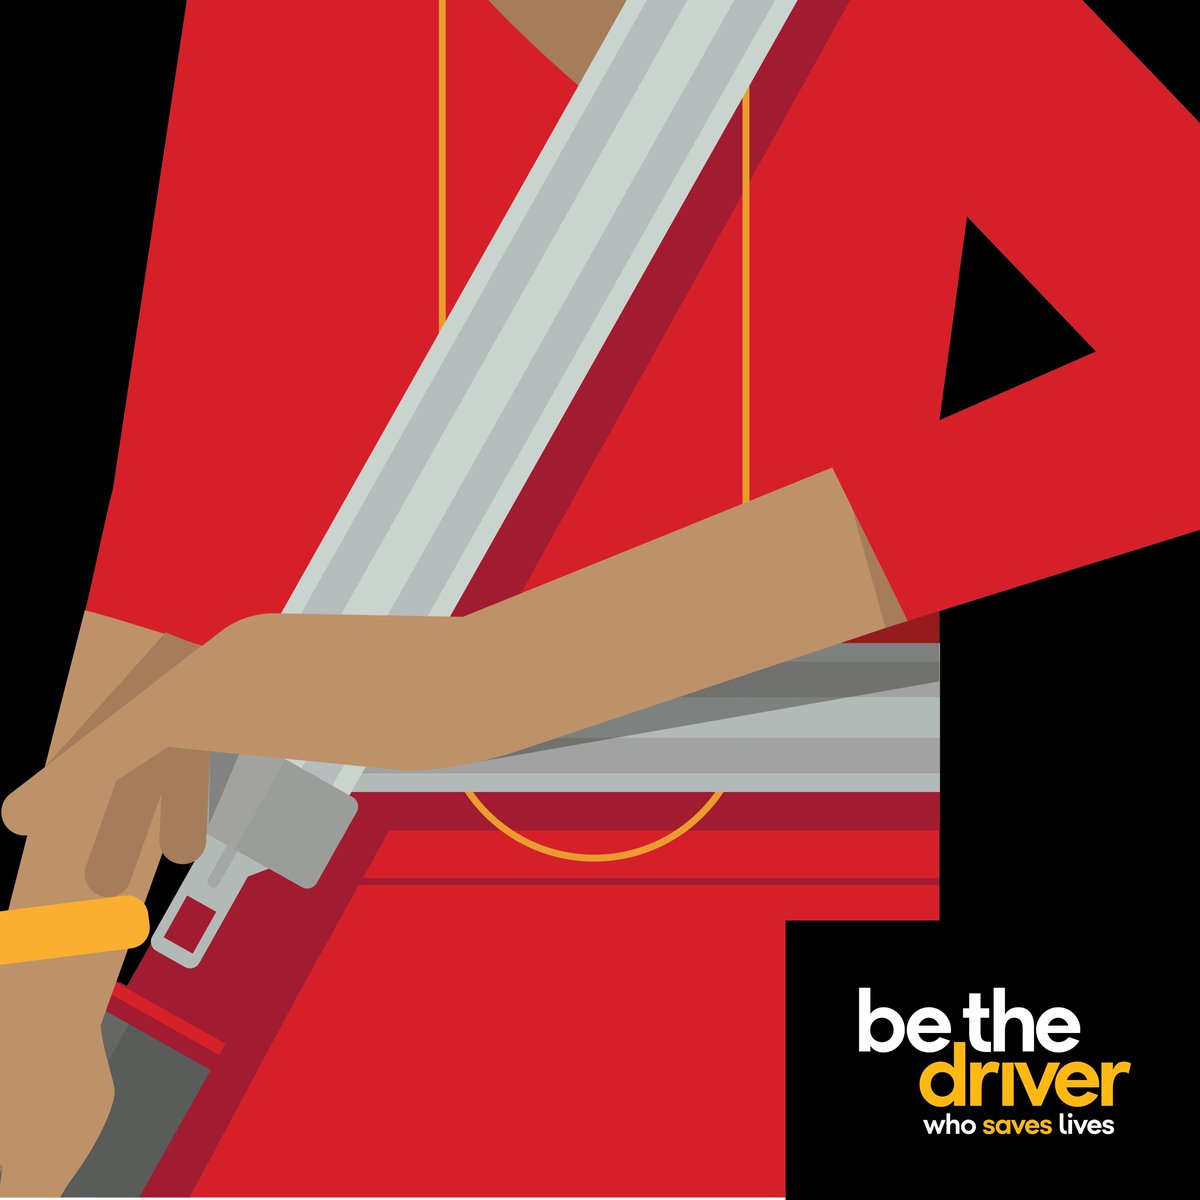 #SeatBeltSafety is just one click away: #BeTheDriver and #BuckleUp. #ClickItOrTicket